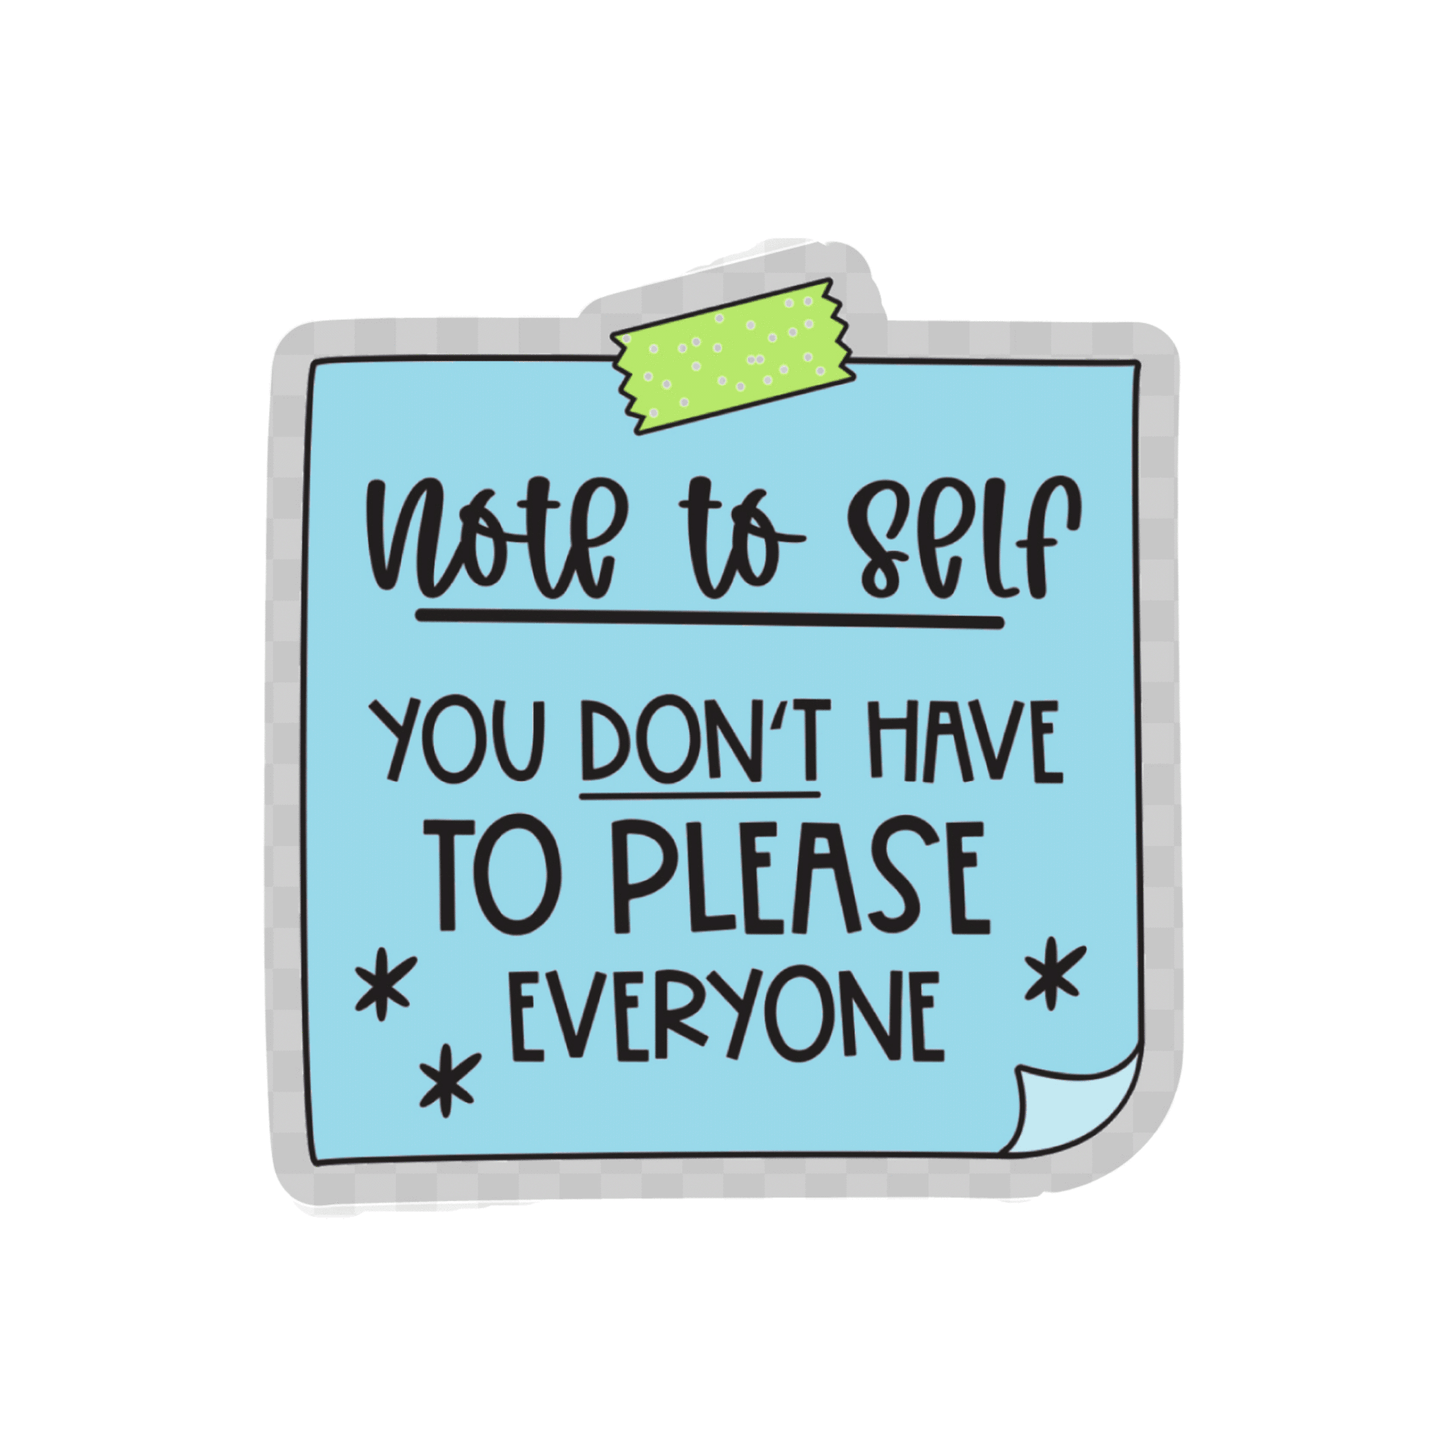 You Don't Have to Please Everyone Sticker, 2-inch